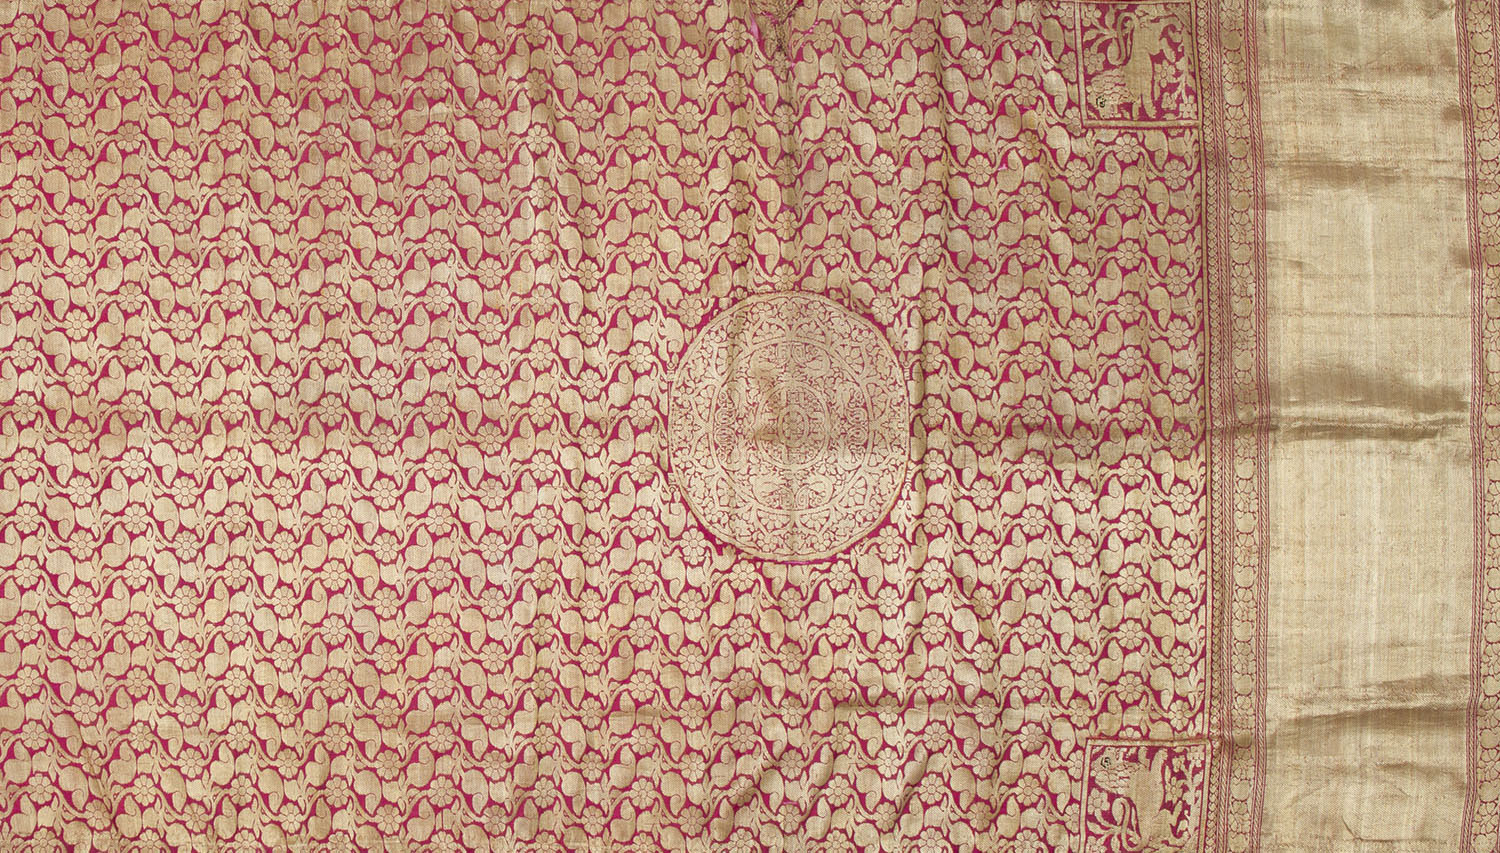 A saree heavily brocaded in gold with a jaali or trellis pattern that covers its length and a large medallion towards the border.